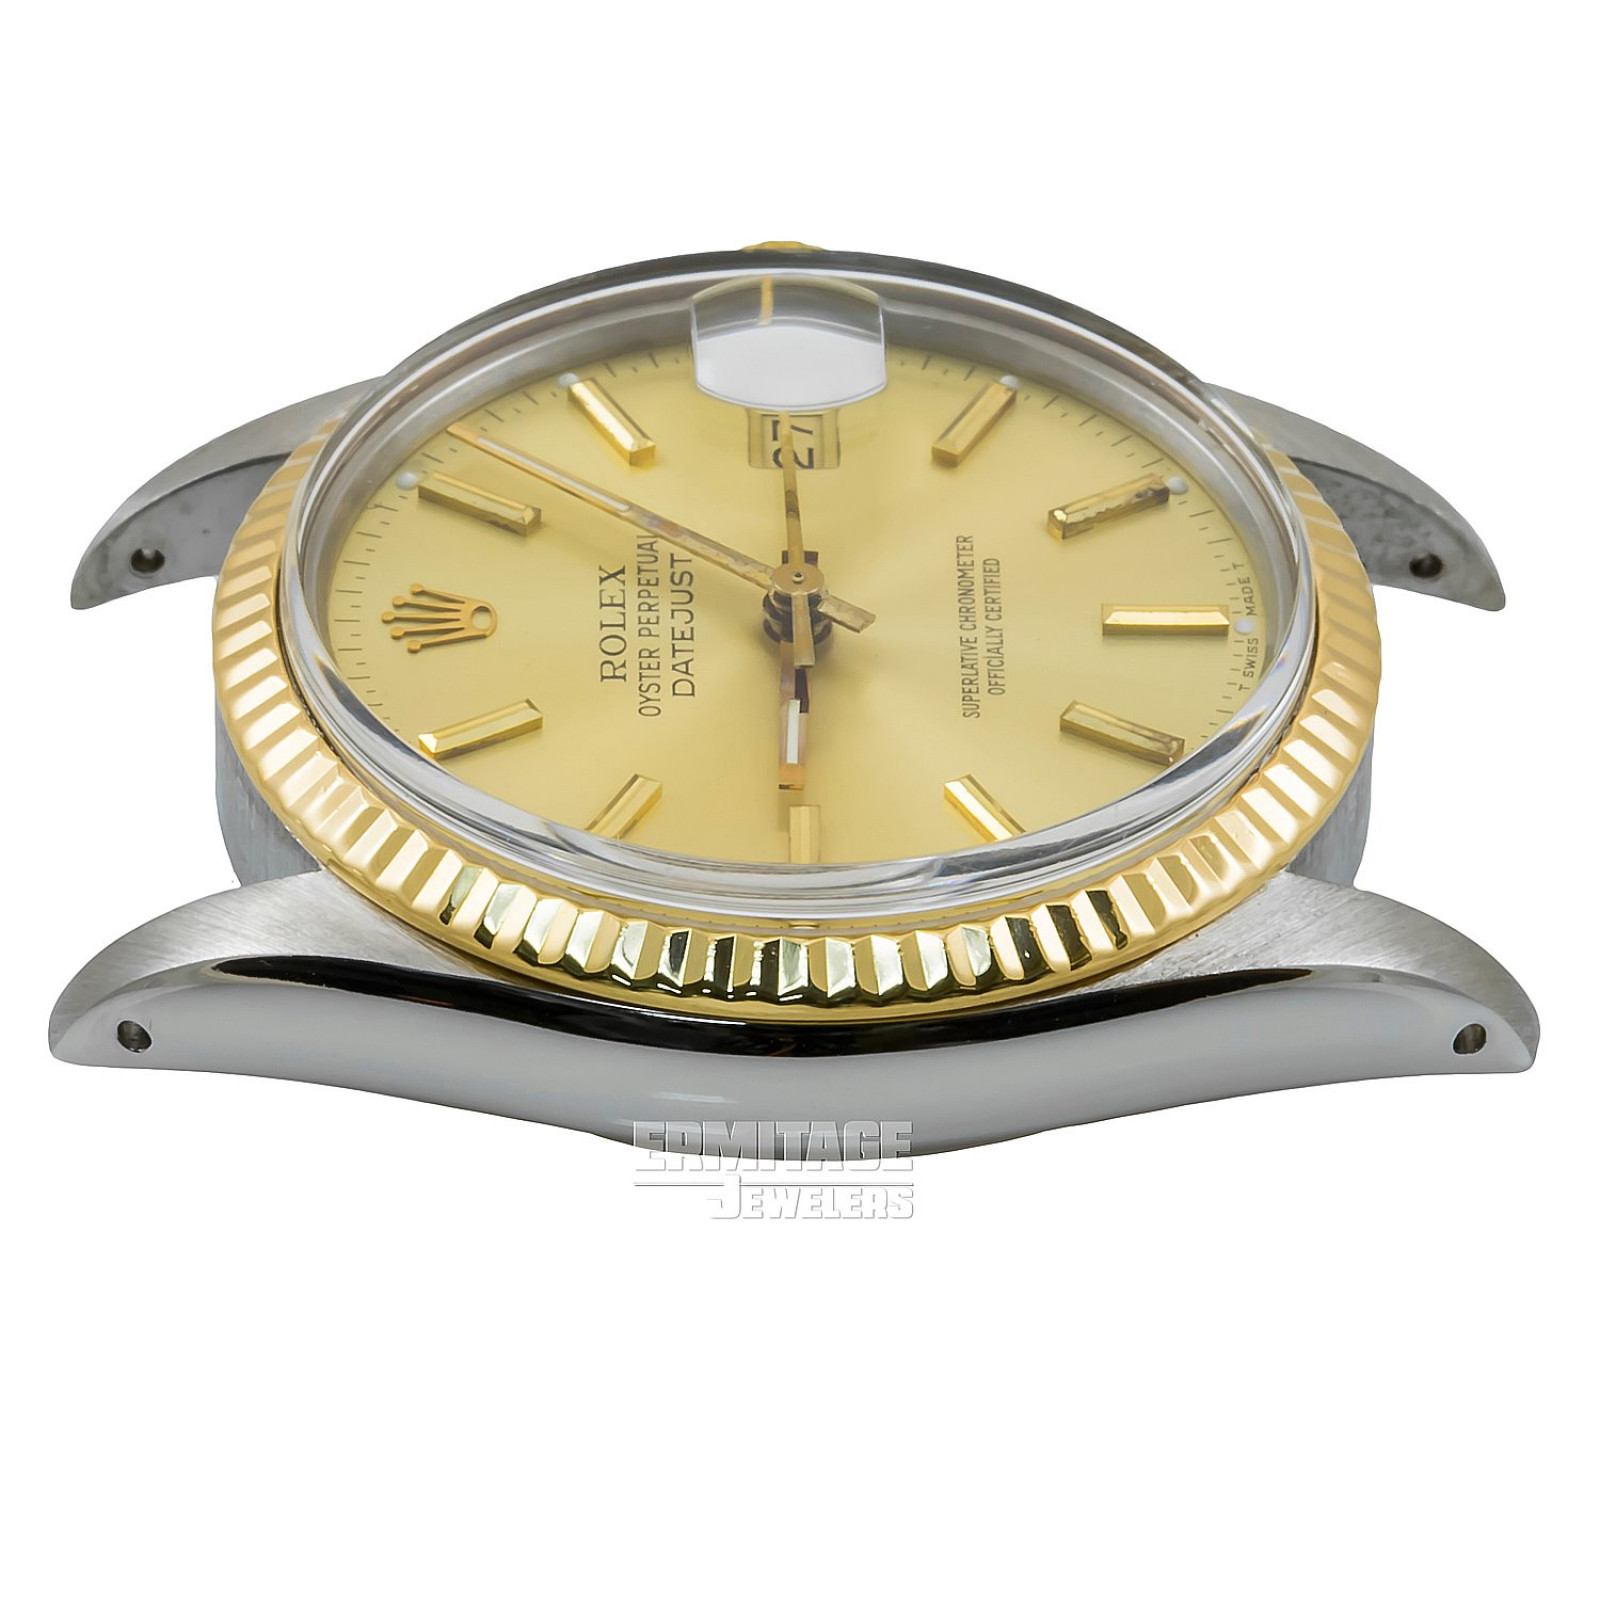 Pre-Owned Rolex Datejust Turn-O-Graph 16253 Stainless Steel, 18kt Yellow Gold & Stainless Steel 36 mm Gold Index